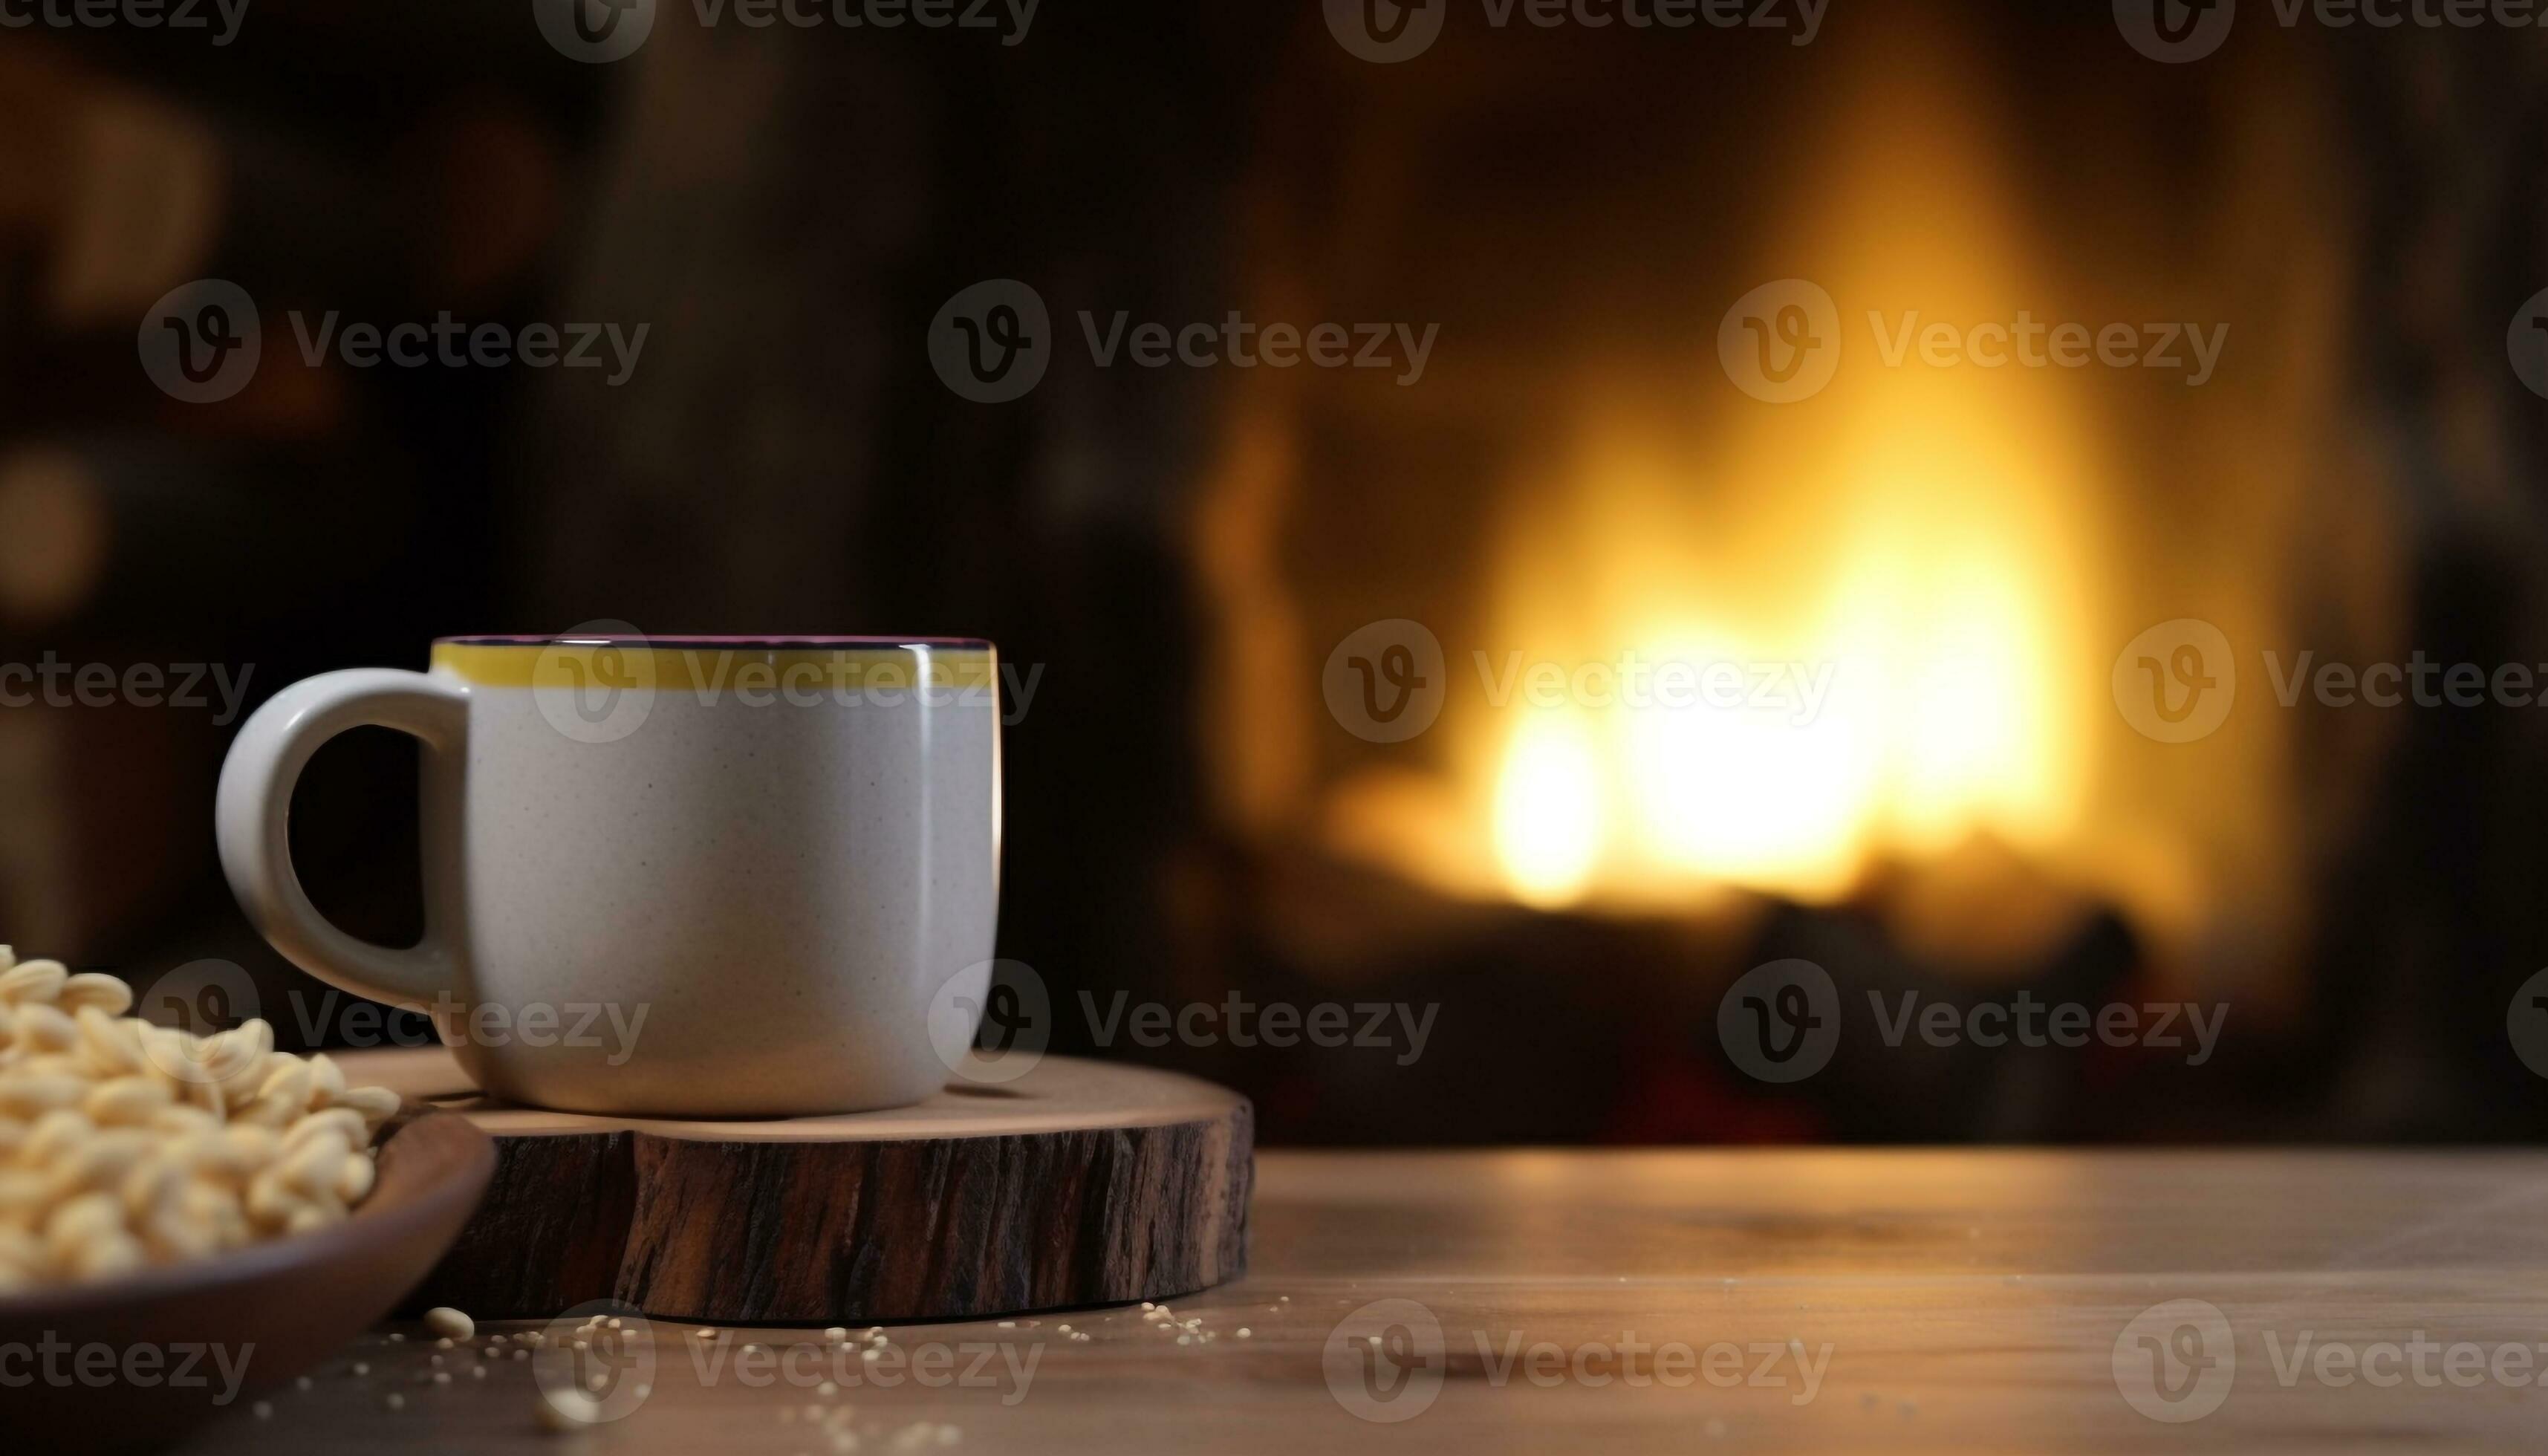 https://static.vecteezy.com/system/resources/previews/024/890/225/large_2x/hot-coffee-on-rustic-table-cozy-winter-night-at-home-generated-by-ai-photo.jpg